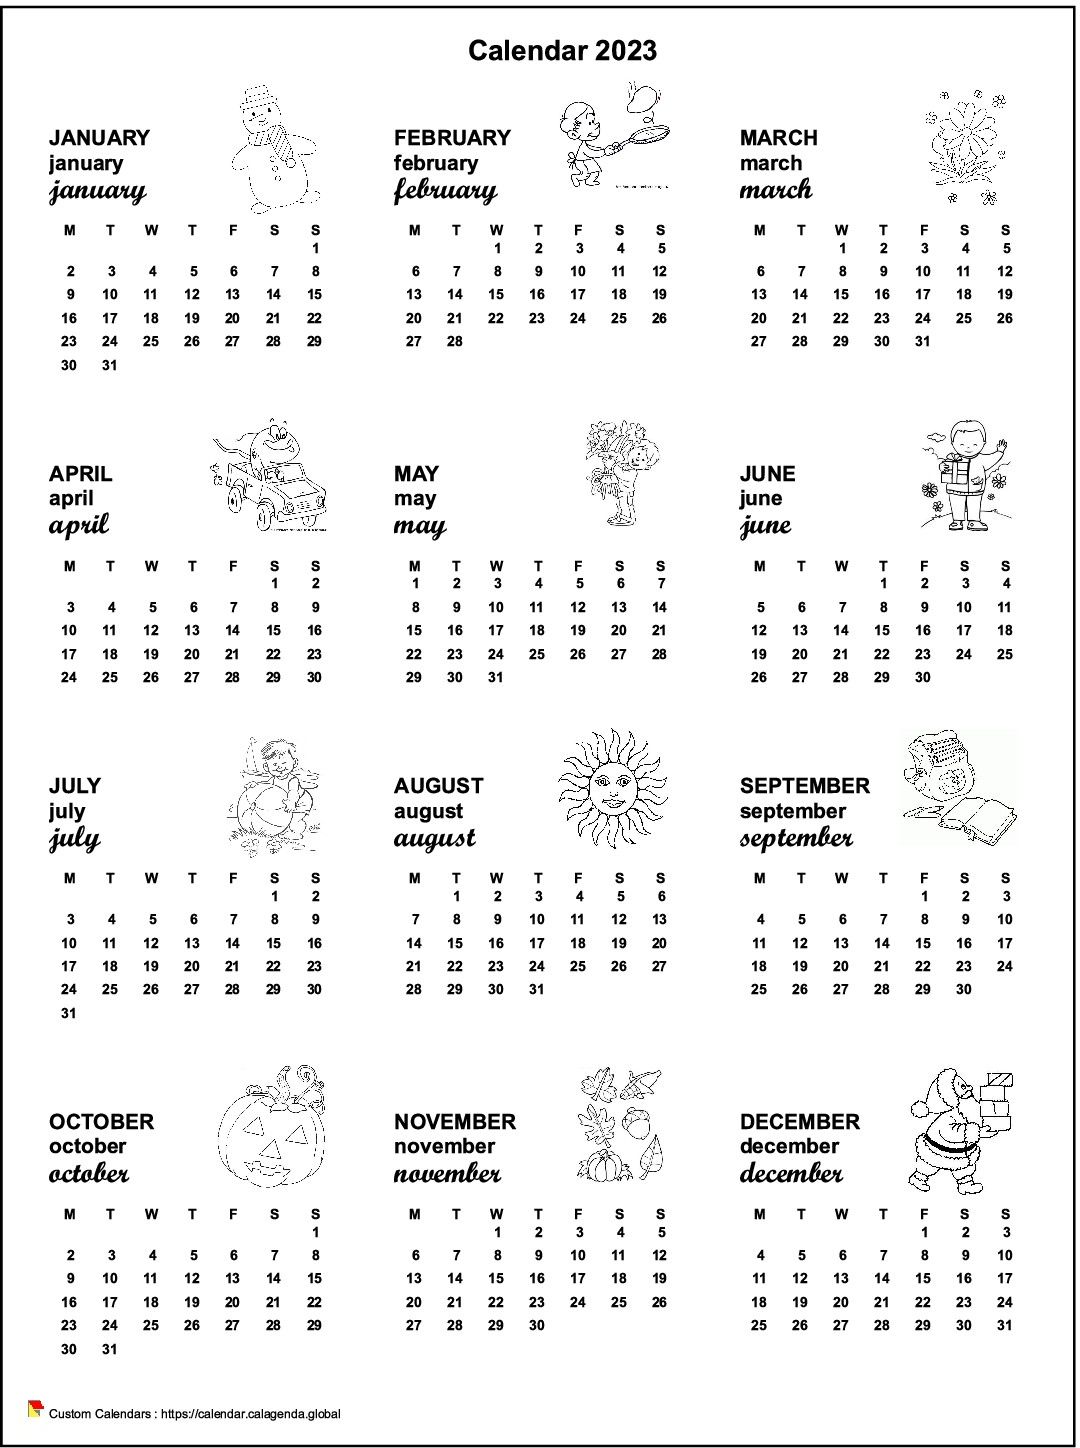 Calendar 2023 annual maternal and primary school